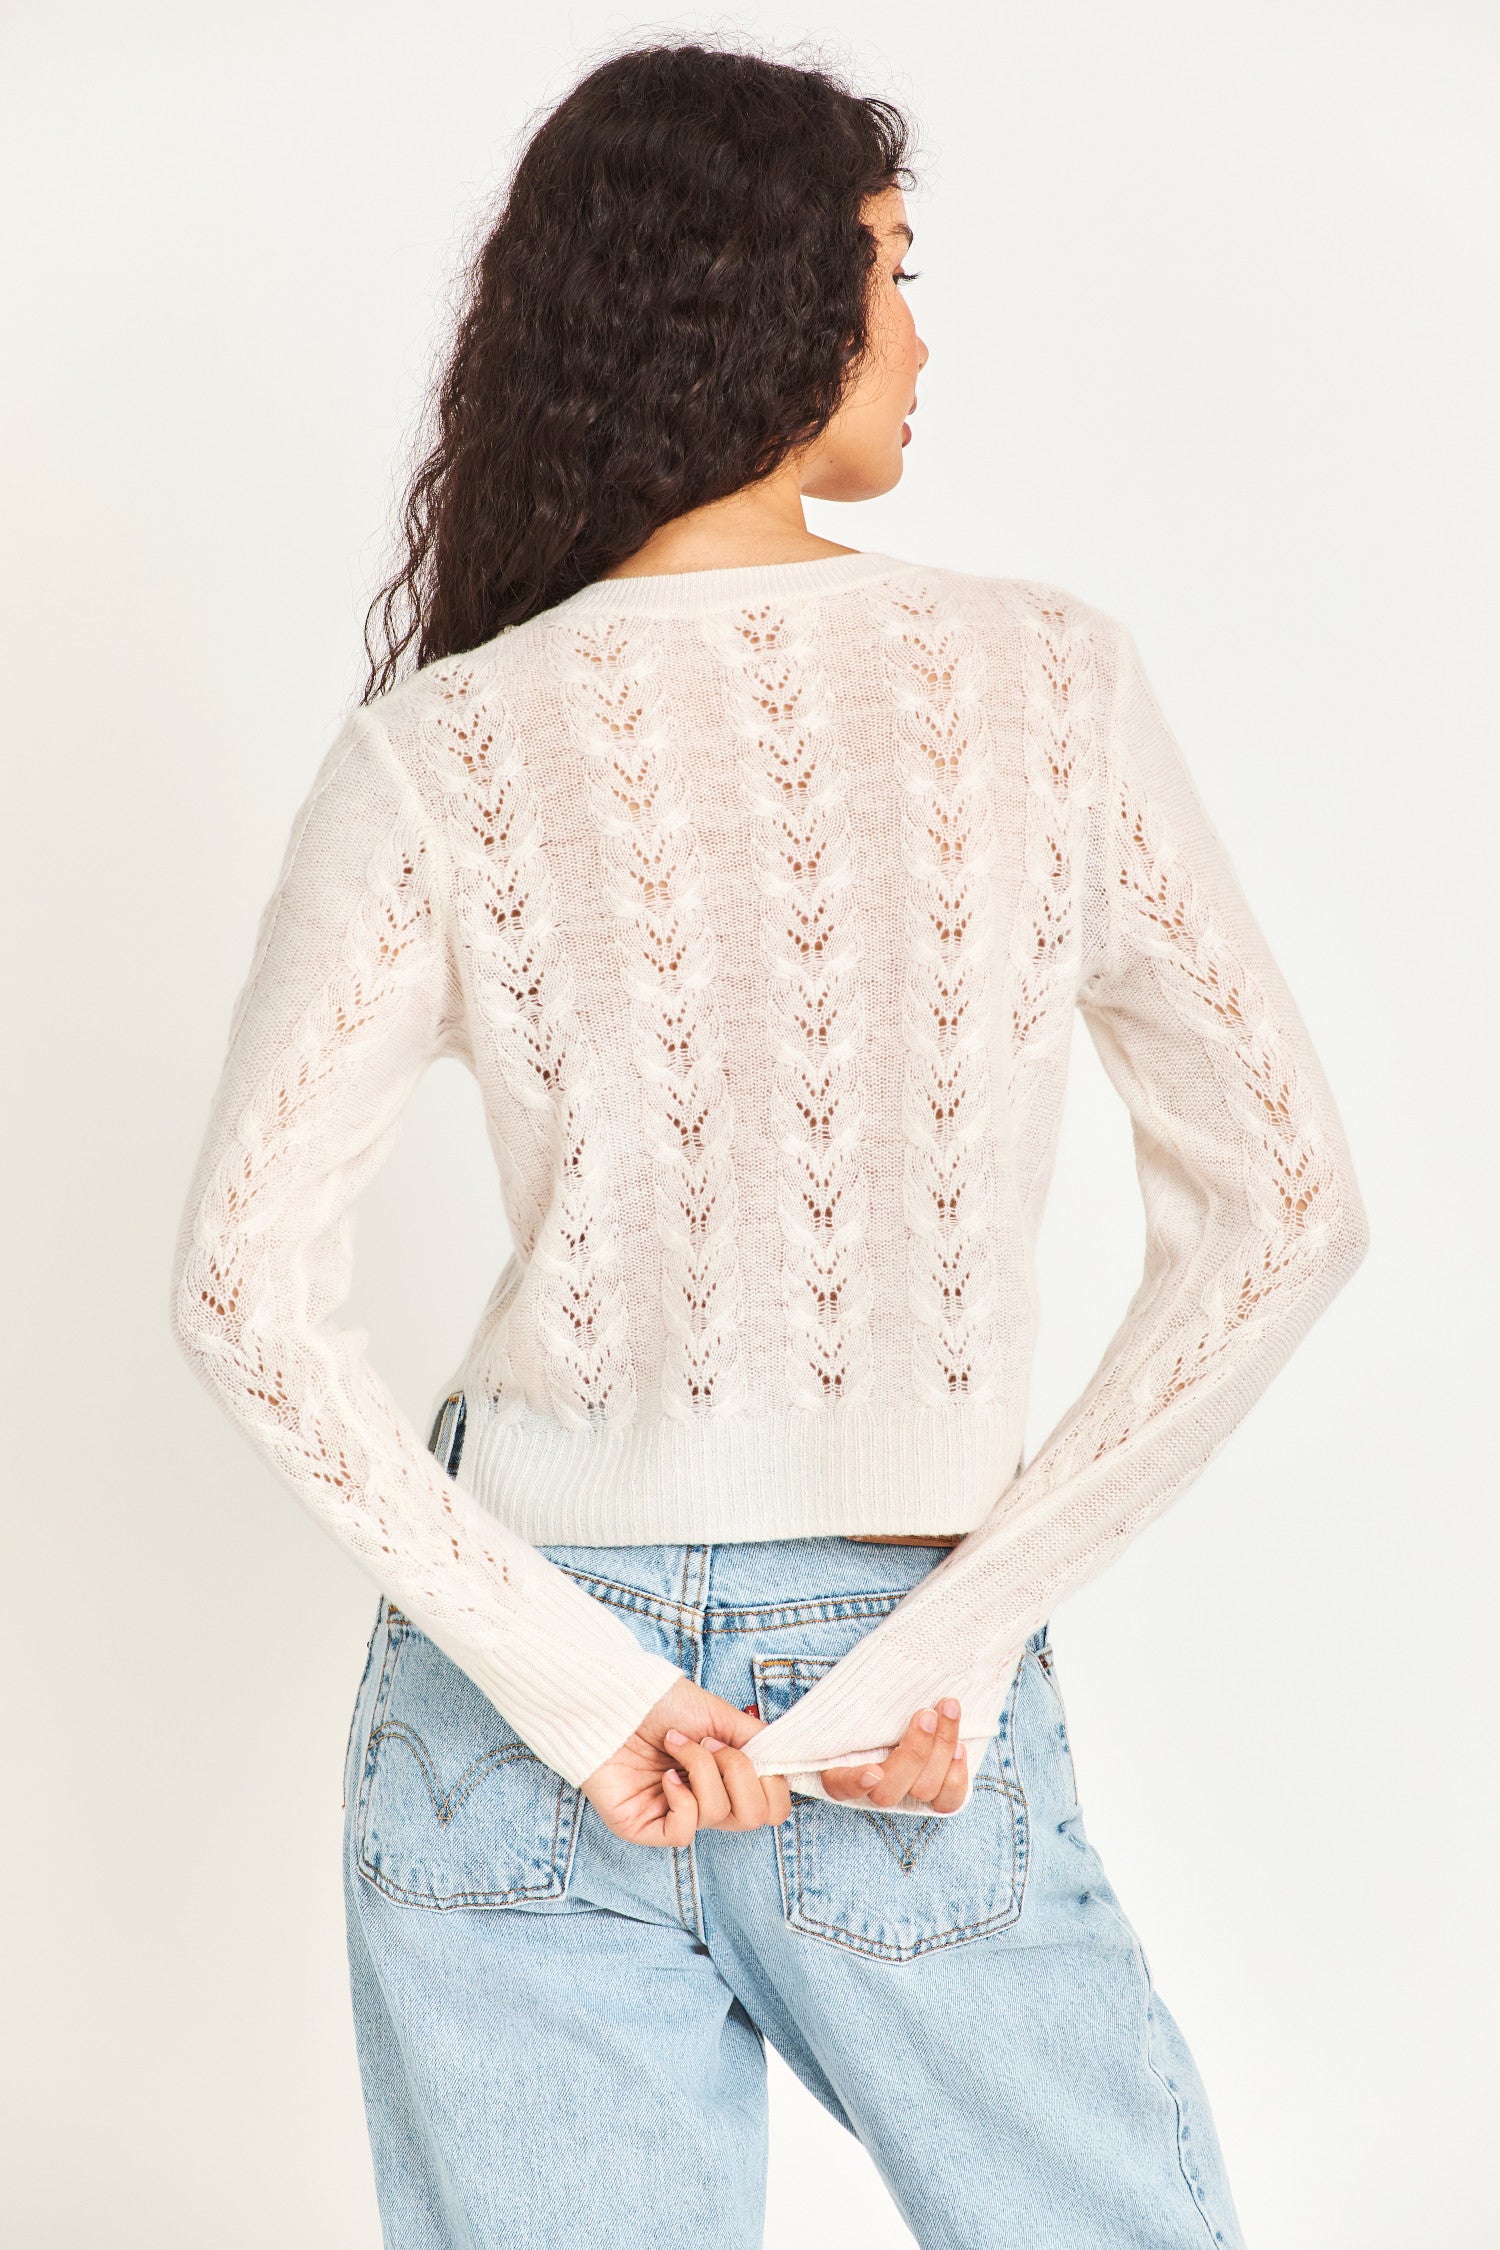  The lightweight white cable knit sweater is a cashmere wool blended sheer fabric with pointelle detailing and a hand embellished neckline with crystals and clusters of iridescent pearls. 